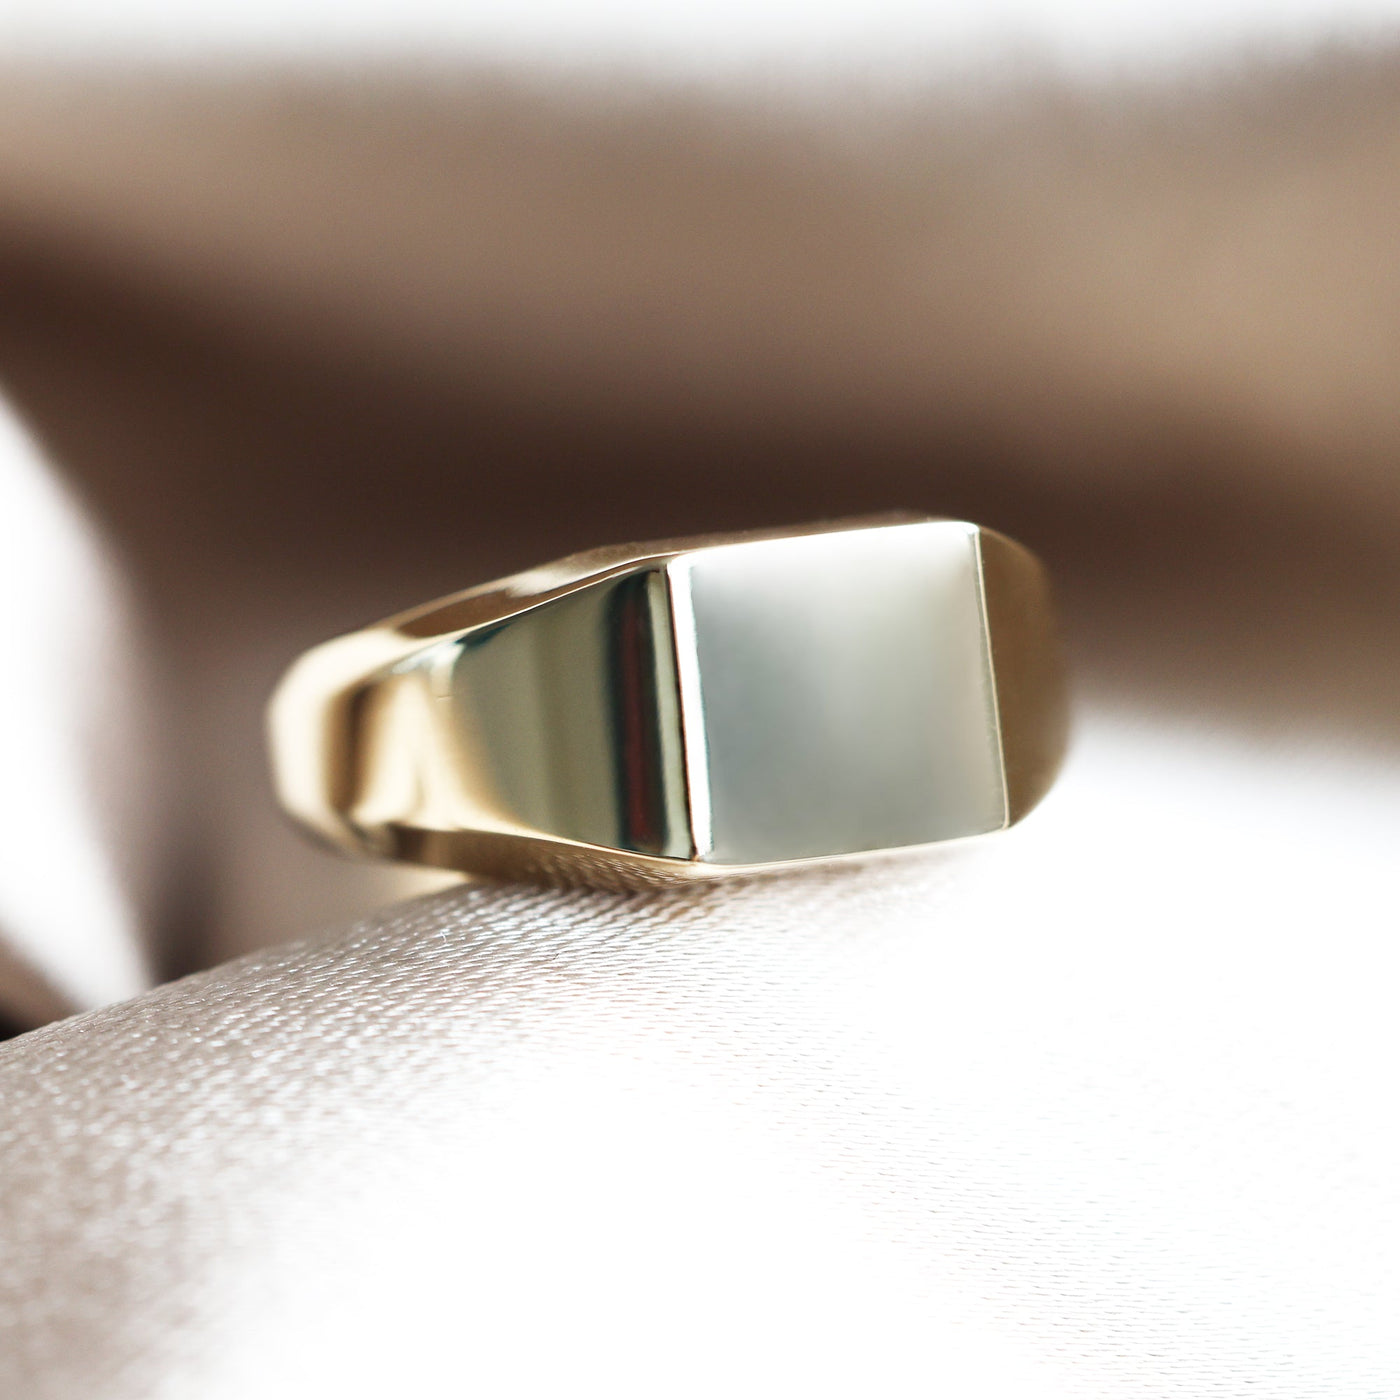 Gold signet ring with polished finish, customizable with gemstones. Premium metals like sterling silver, gold, and platinum. Band width 9.3mm. Free insured shipping.